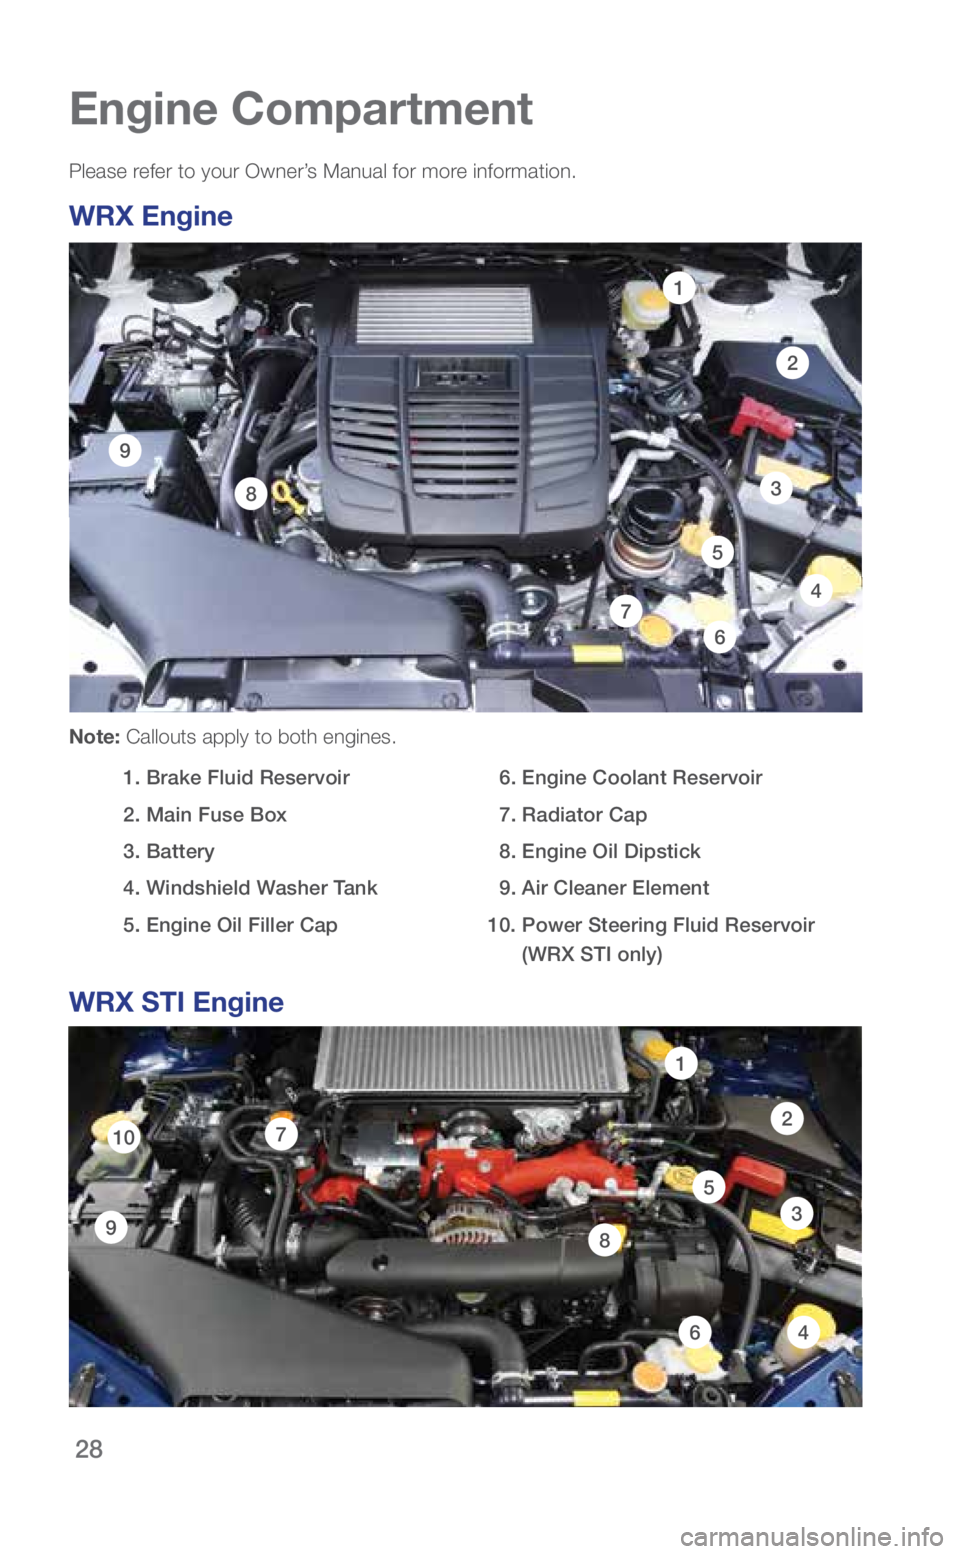 SUBARU WRX 2018  Quick Guide 28
102
3
7
1
8
5
4
9
6
Engine Compartment
Additional
Information
Please refer to your Owner’s Manual for more information. 
WRX Engine
 
Note: Callouts apply to both engines.
  1. Brake Fluid Reserv